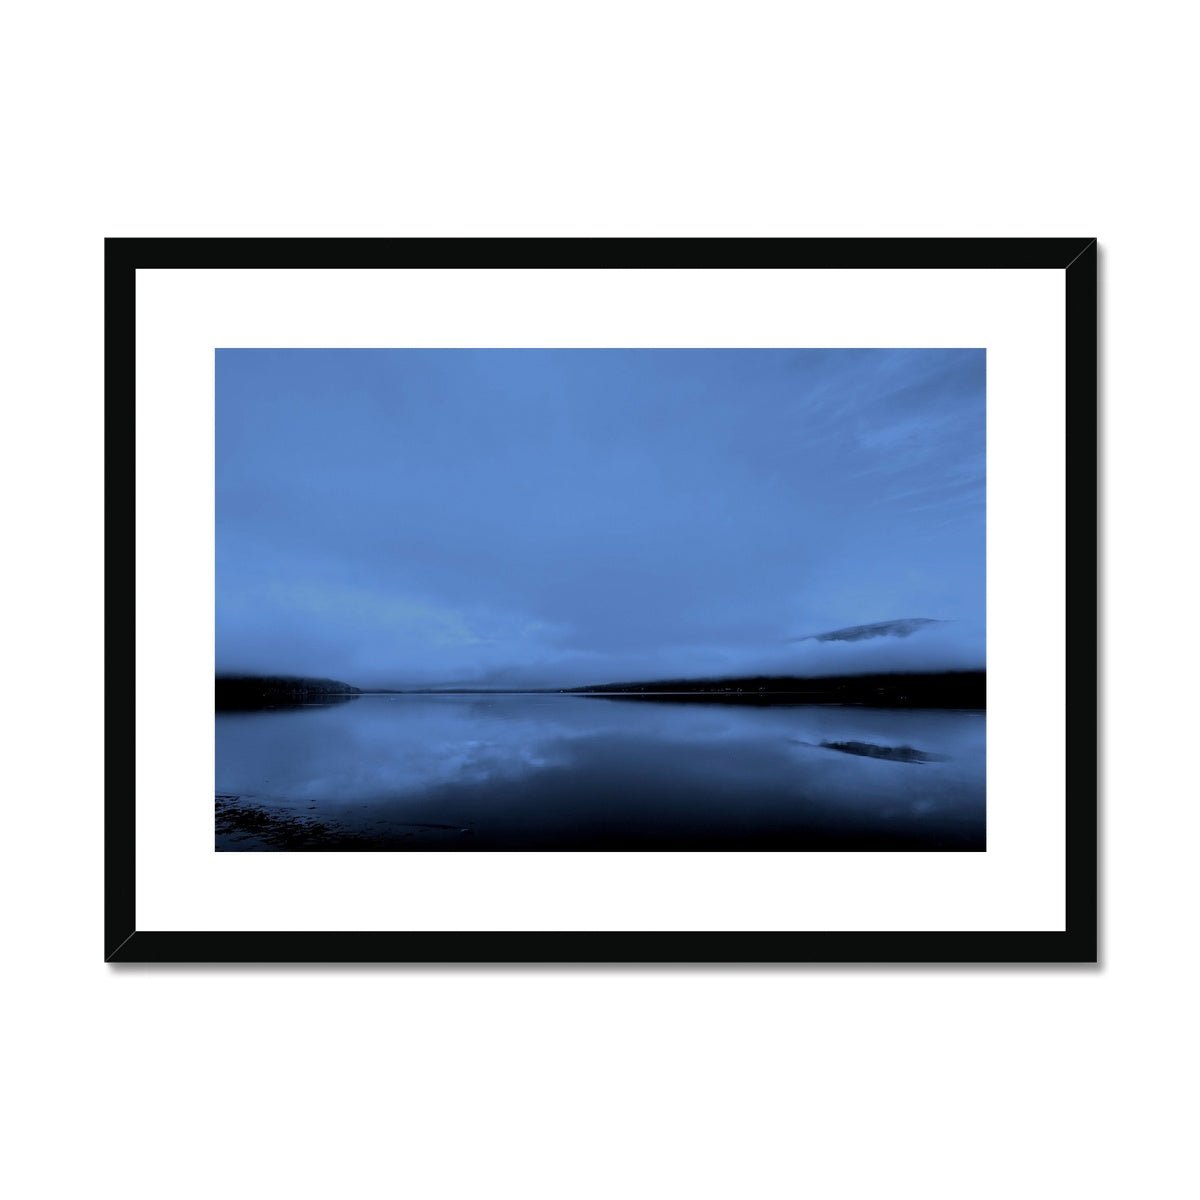 The Blue Hour Loch Fyne Painting | Framed & Mounted Prints From Scotland-Framed & Mounted Prints-Scottish Lochs & Mountains Art Gallery-A2 Landscape-Black Frame-Paintings, Prints, Homeware, Art Gifts From Scotland By Scottish Artist Kevin Hunter